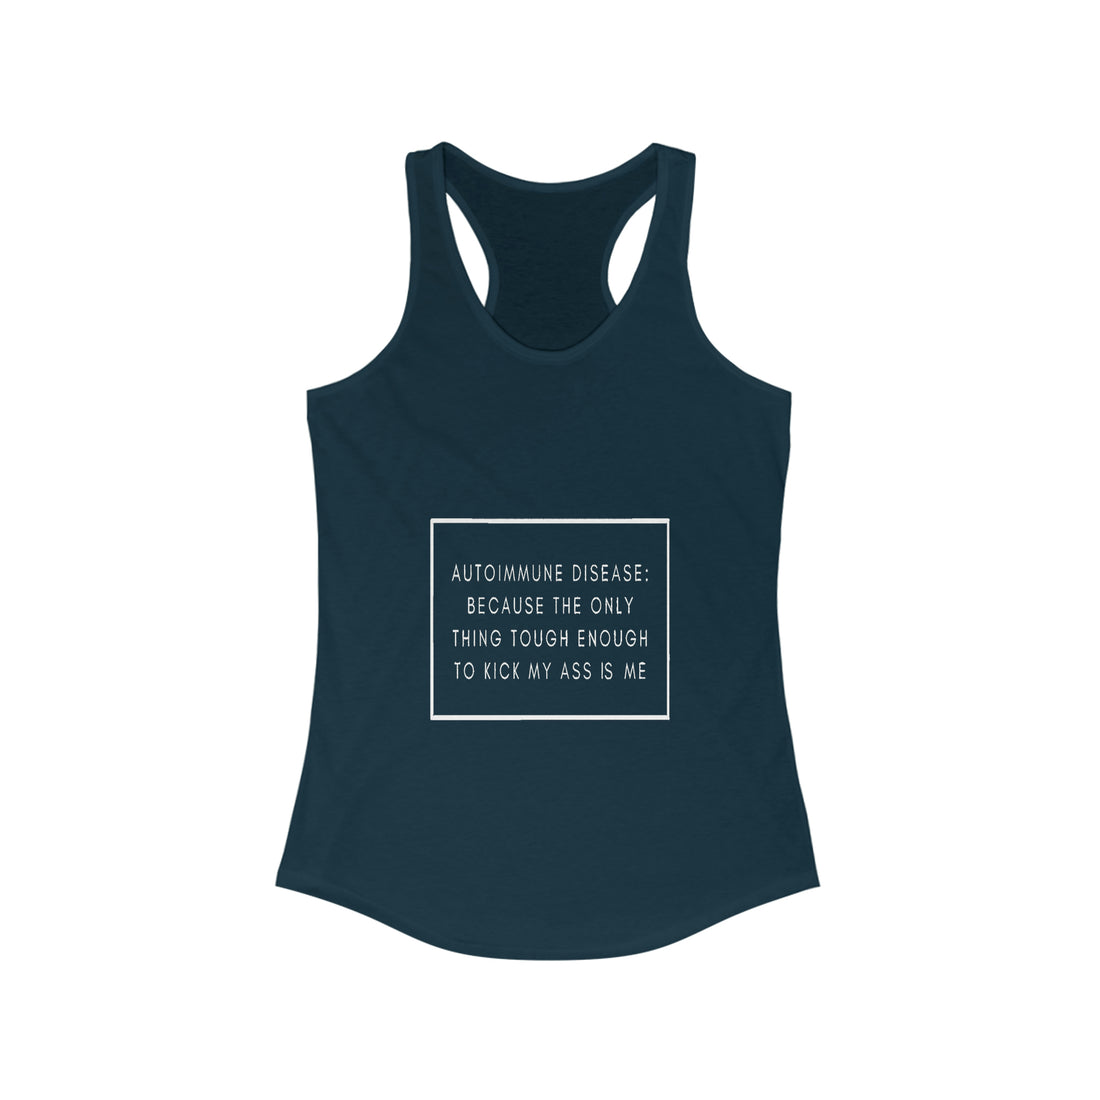 Autoimmune Disease Because The Only Thing Tough Enough To Kick My Ass Is Me - Racerback Tank Top